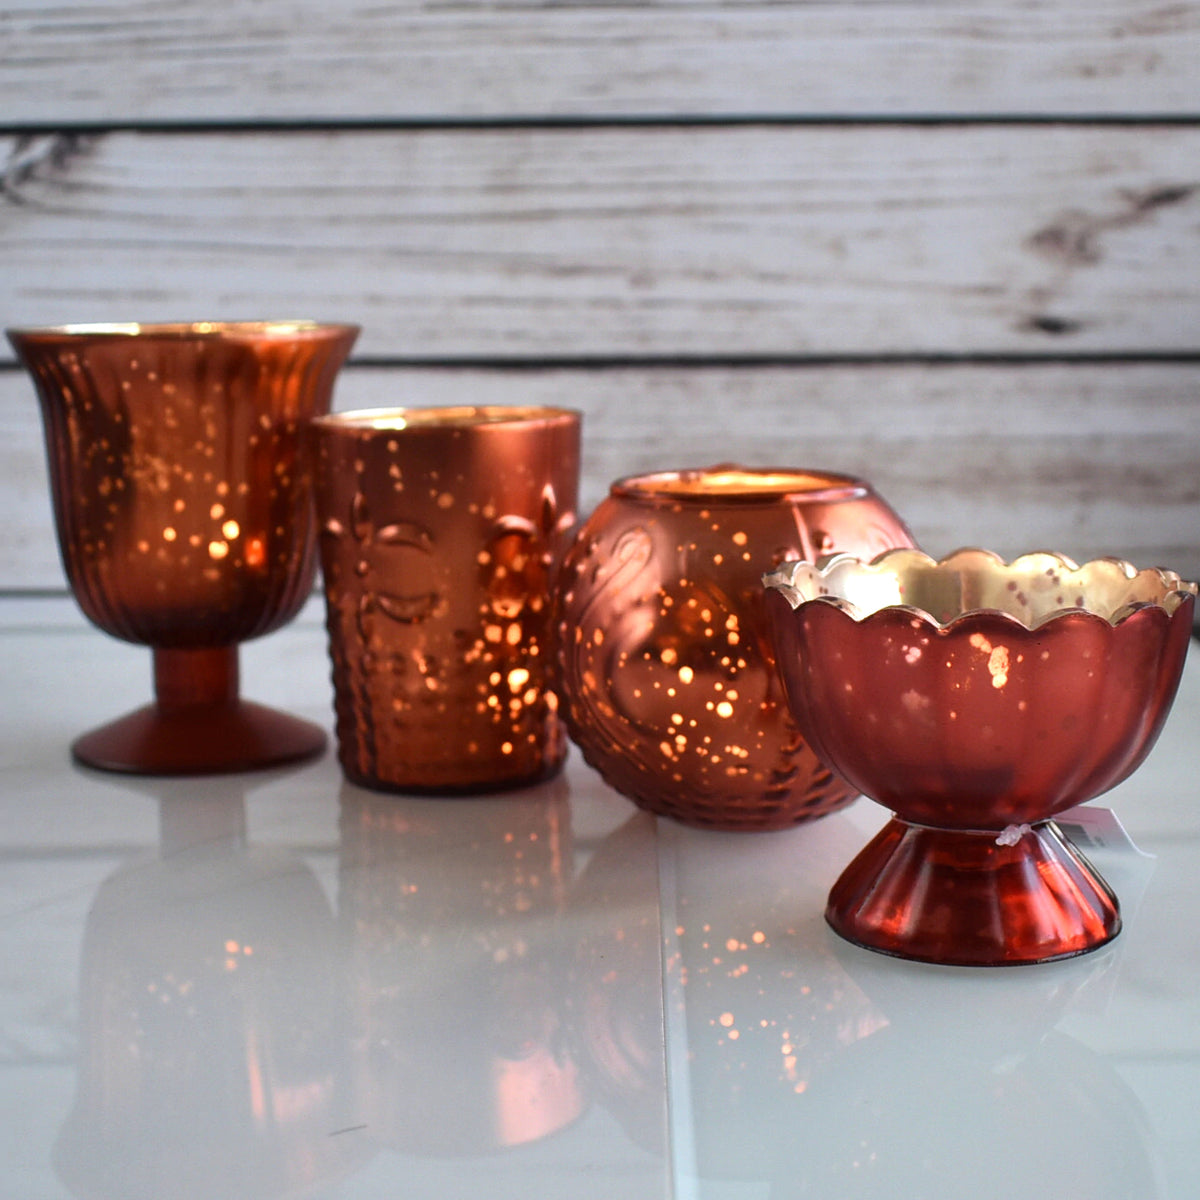 Vintage Glam Mercury Glass Tealight Votive Candle Holders (Rustic Copper Red, Set of 4, Assorted Designs, Sizes) - Weddings Events Parties Home Decor - PaperLanternStore.com - Paper Lanterns, Decor, Party Lights &amp; More